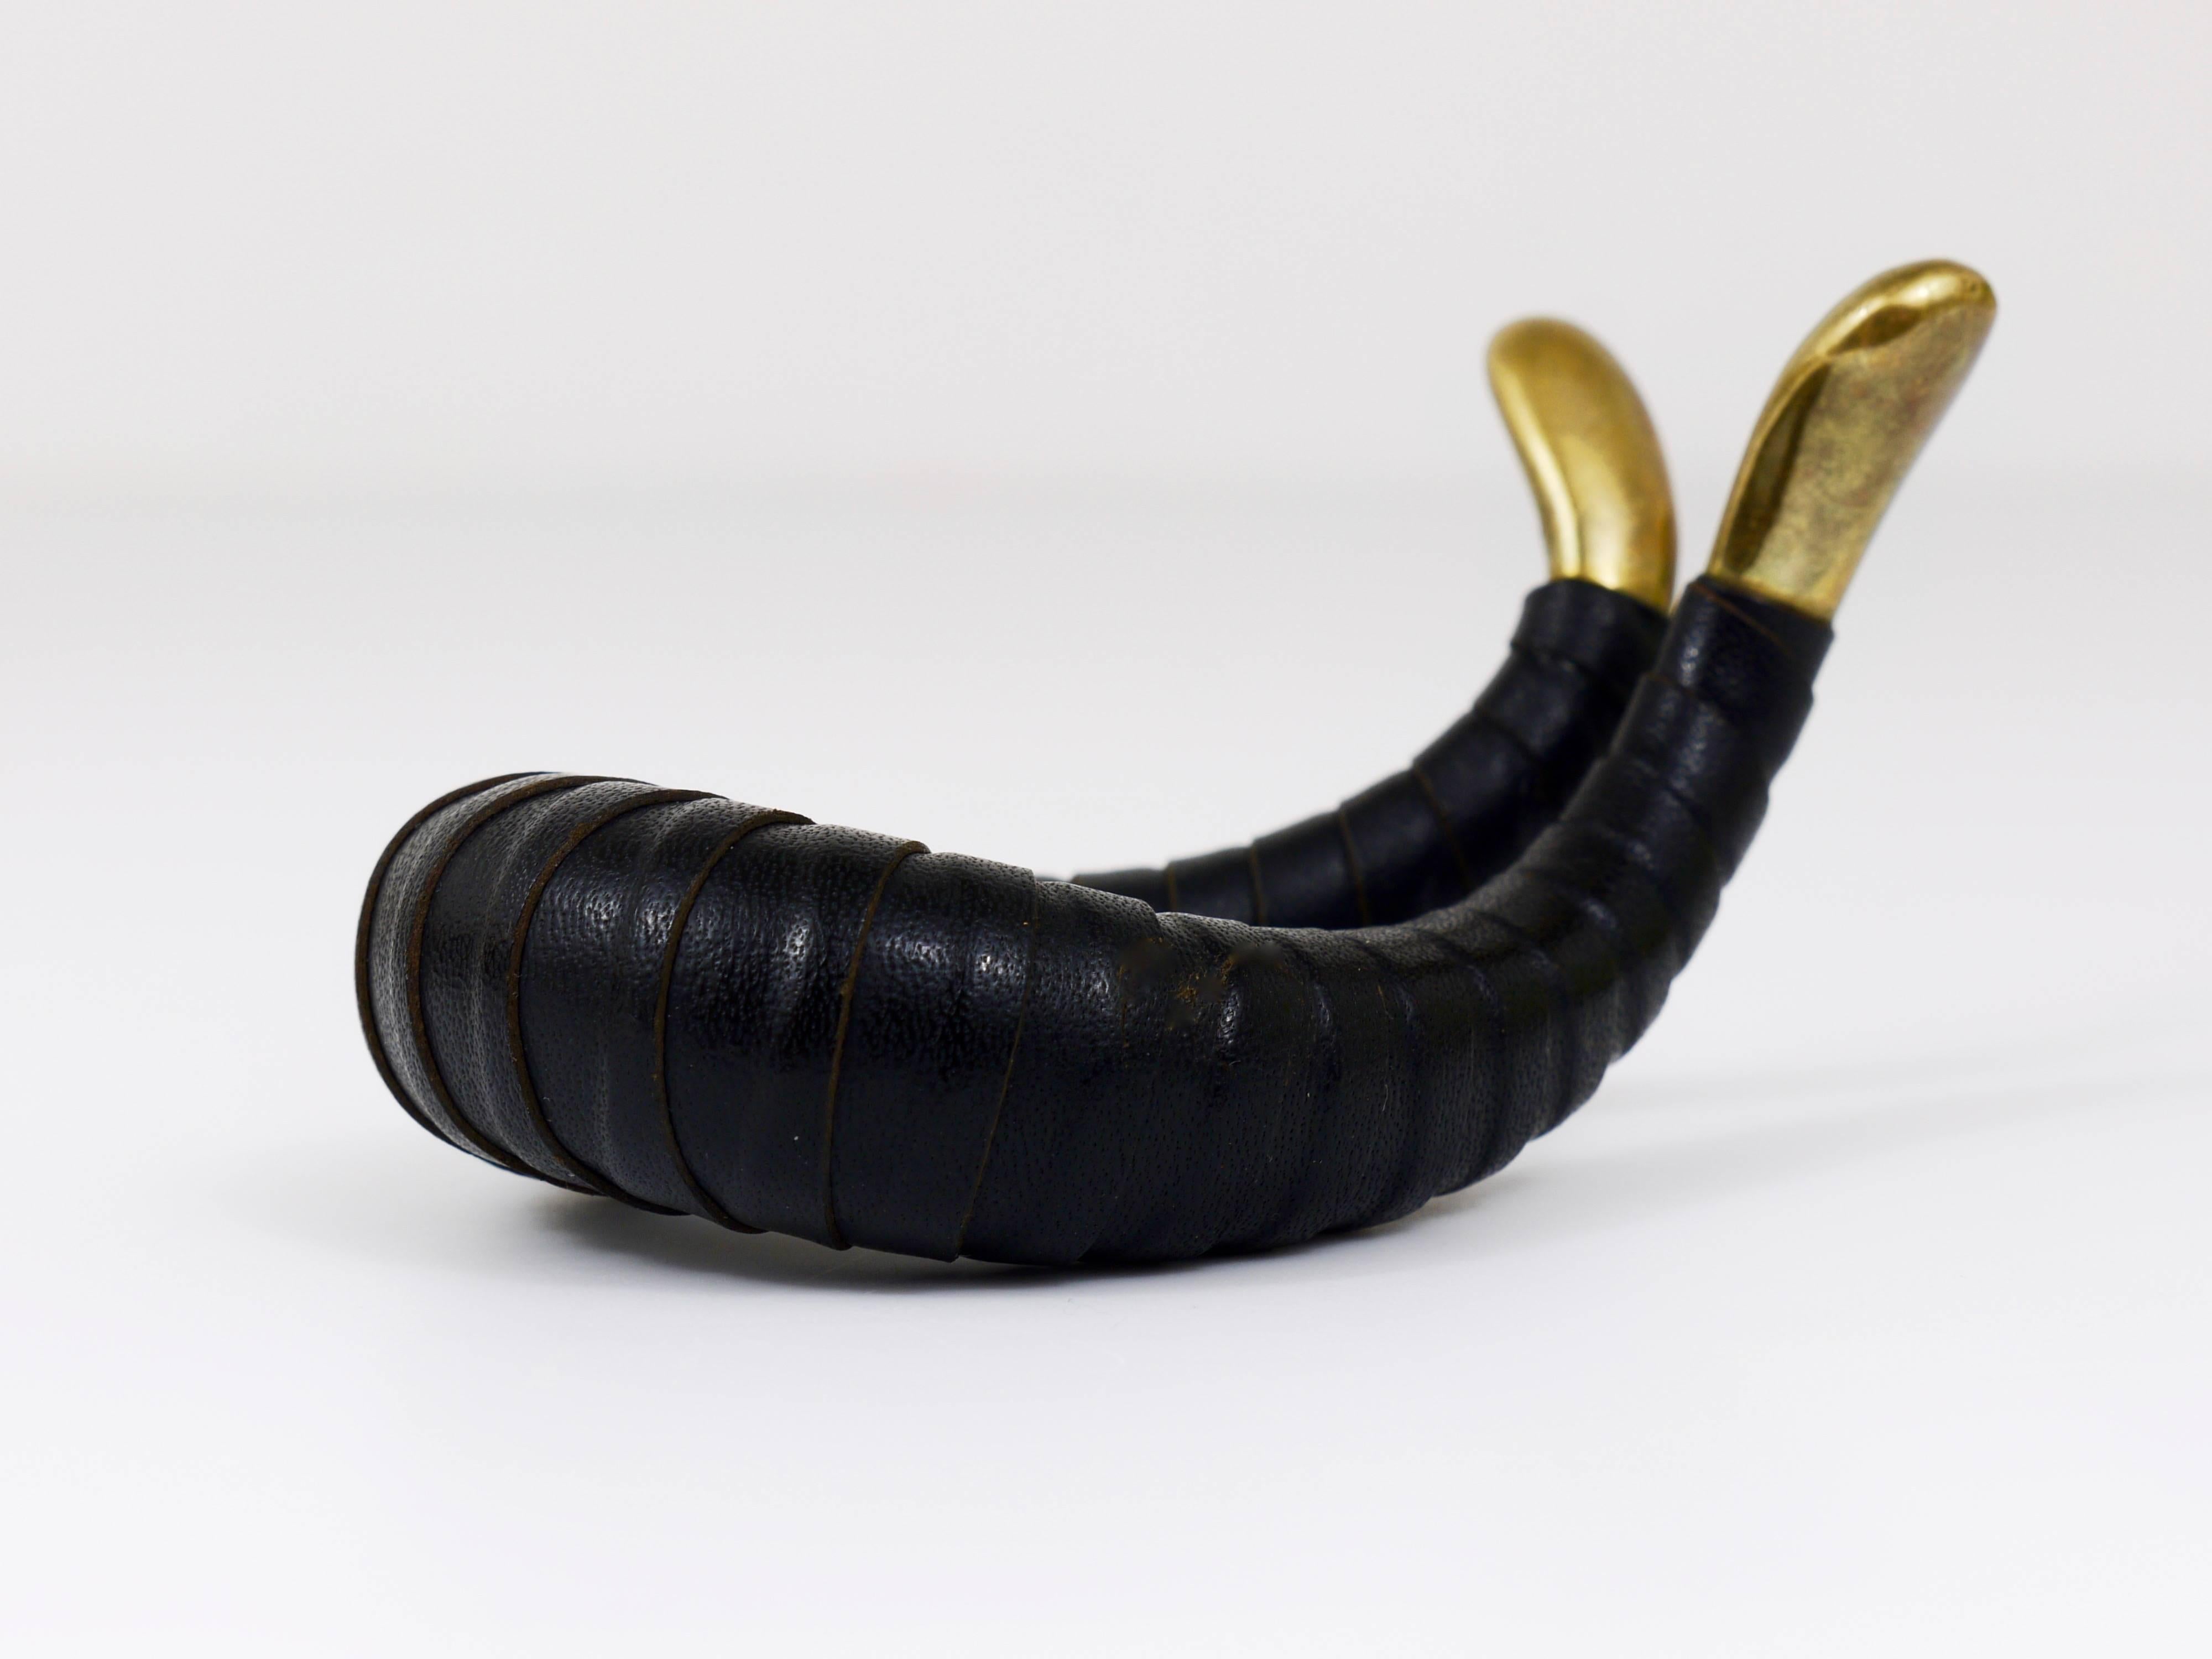 A beautiful vintage modernist pipe stand, made of solid brass and black leather. Designed and executed in the 1950s by Carl Aubock, Vienna. This pipe rest is in very good condition.